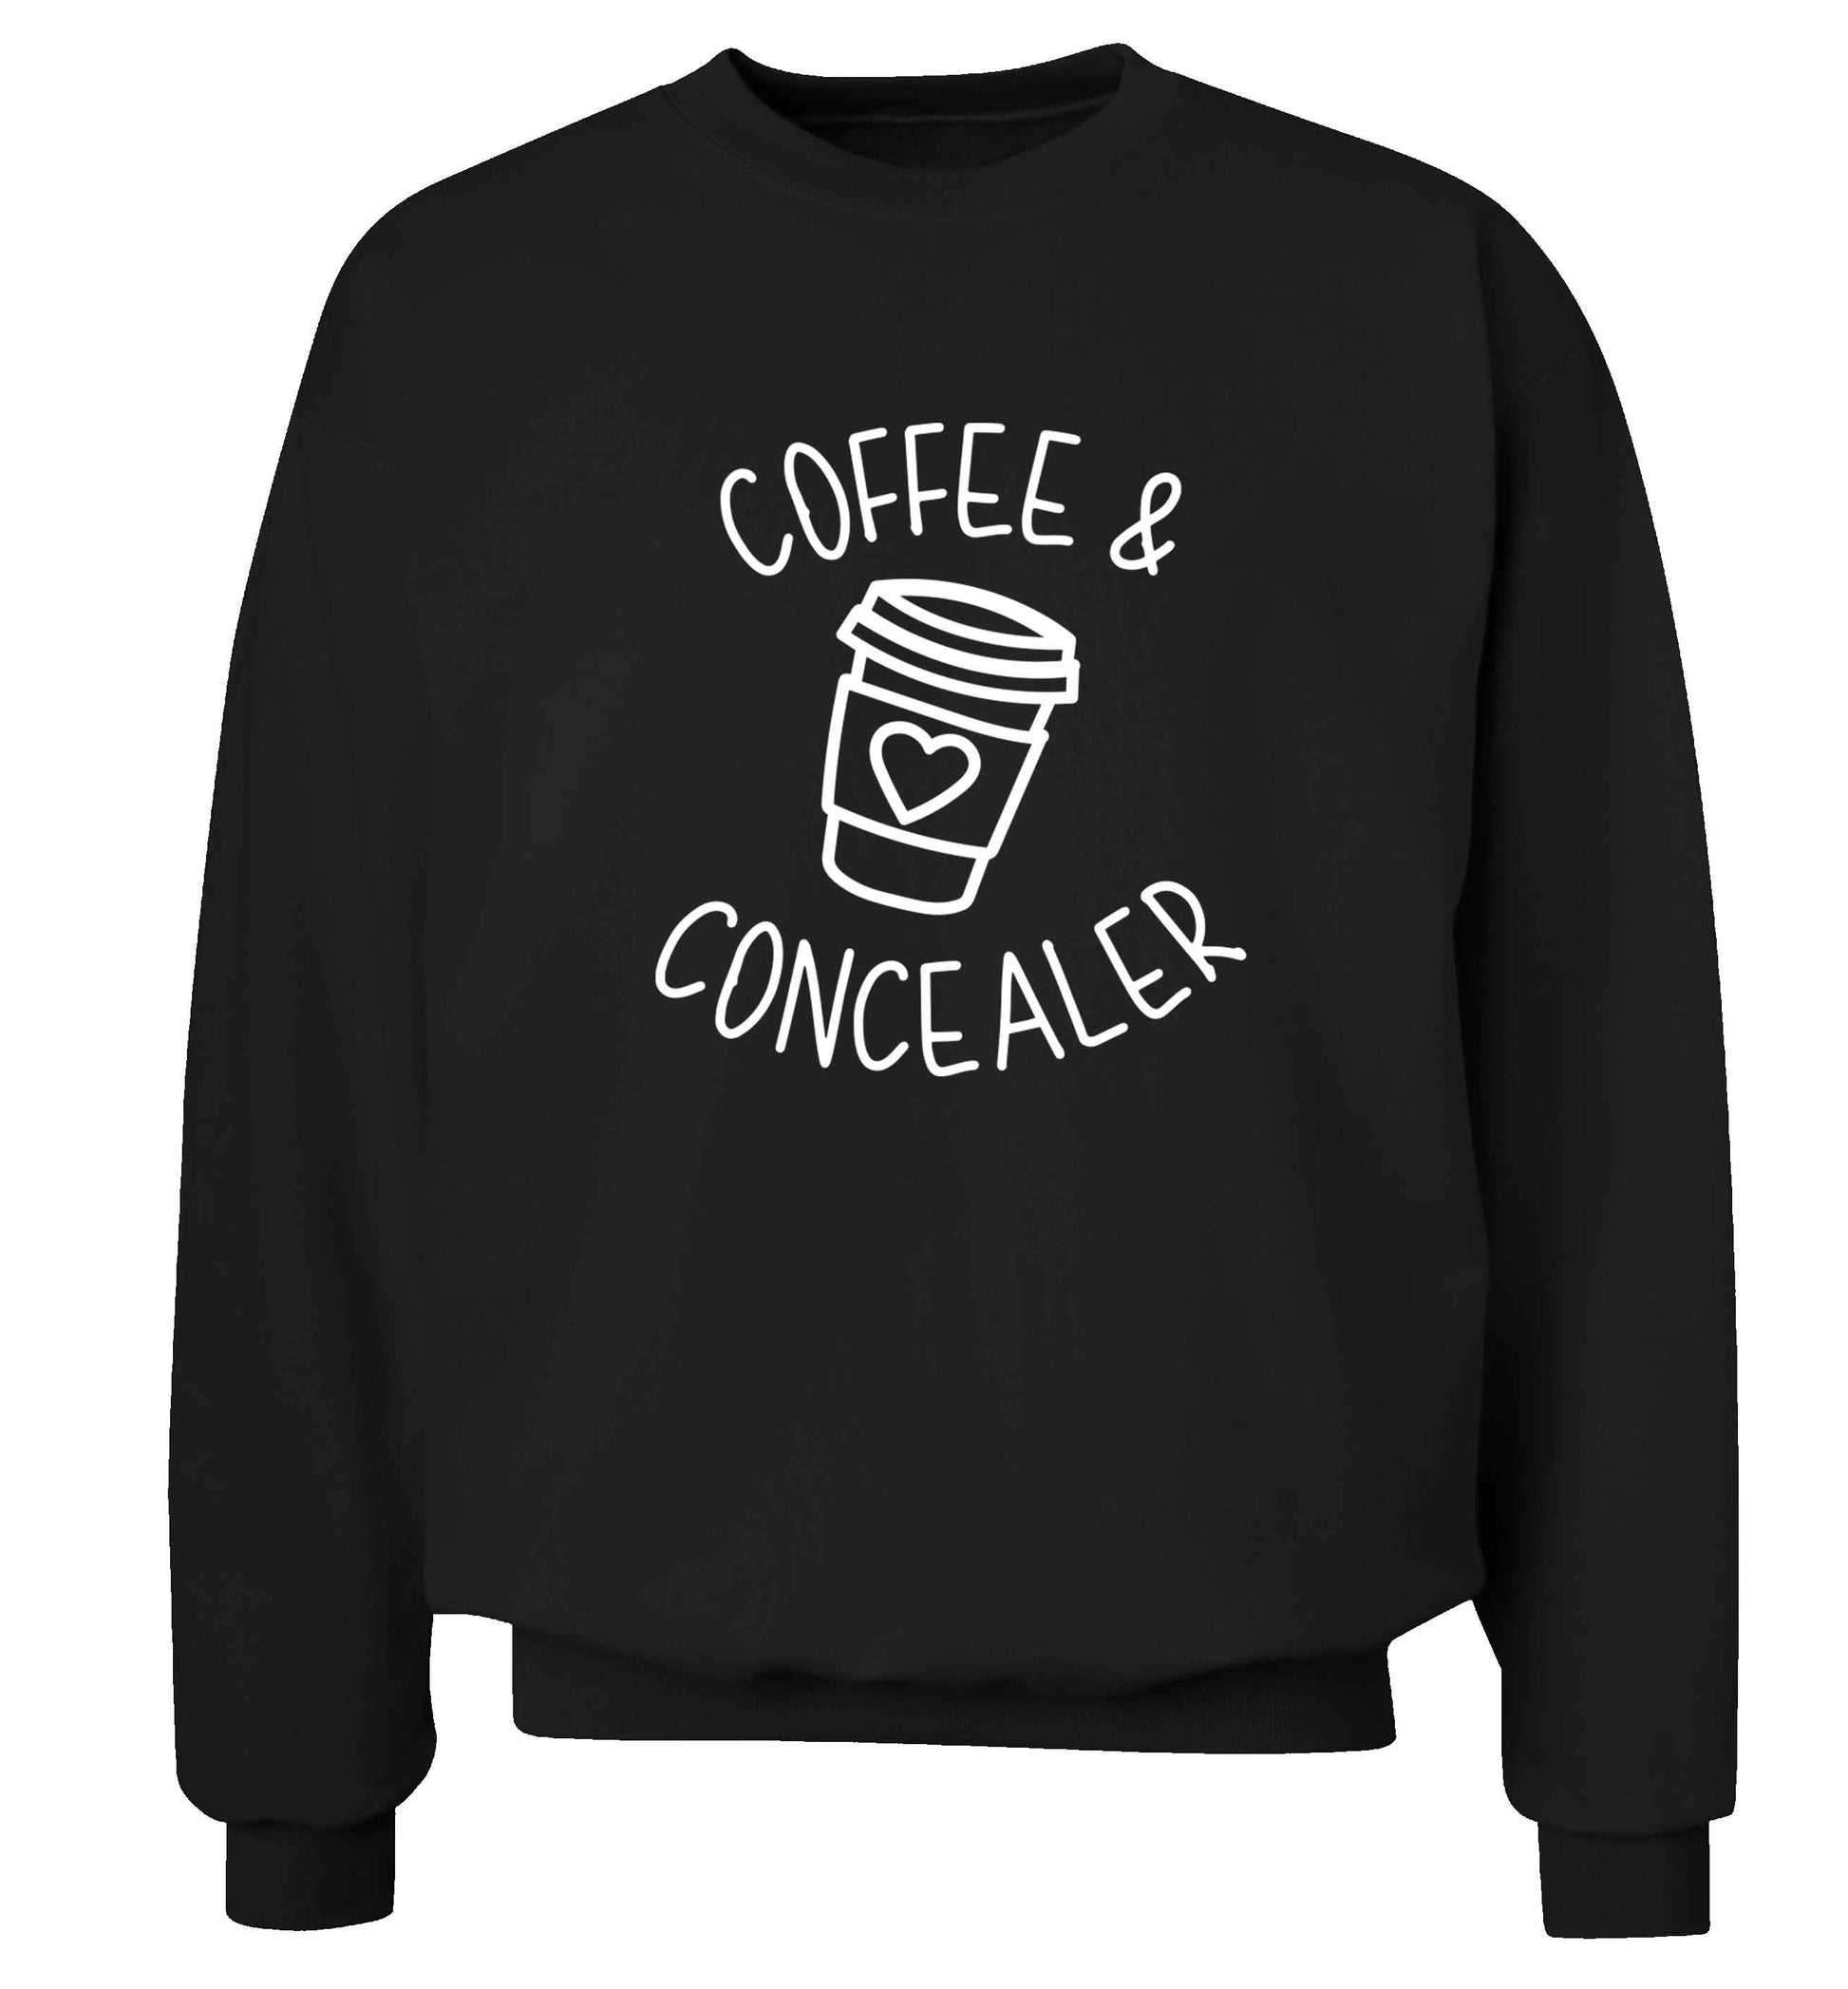 Coffee and concealer adult's unisex black sweater 2XL